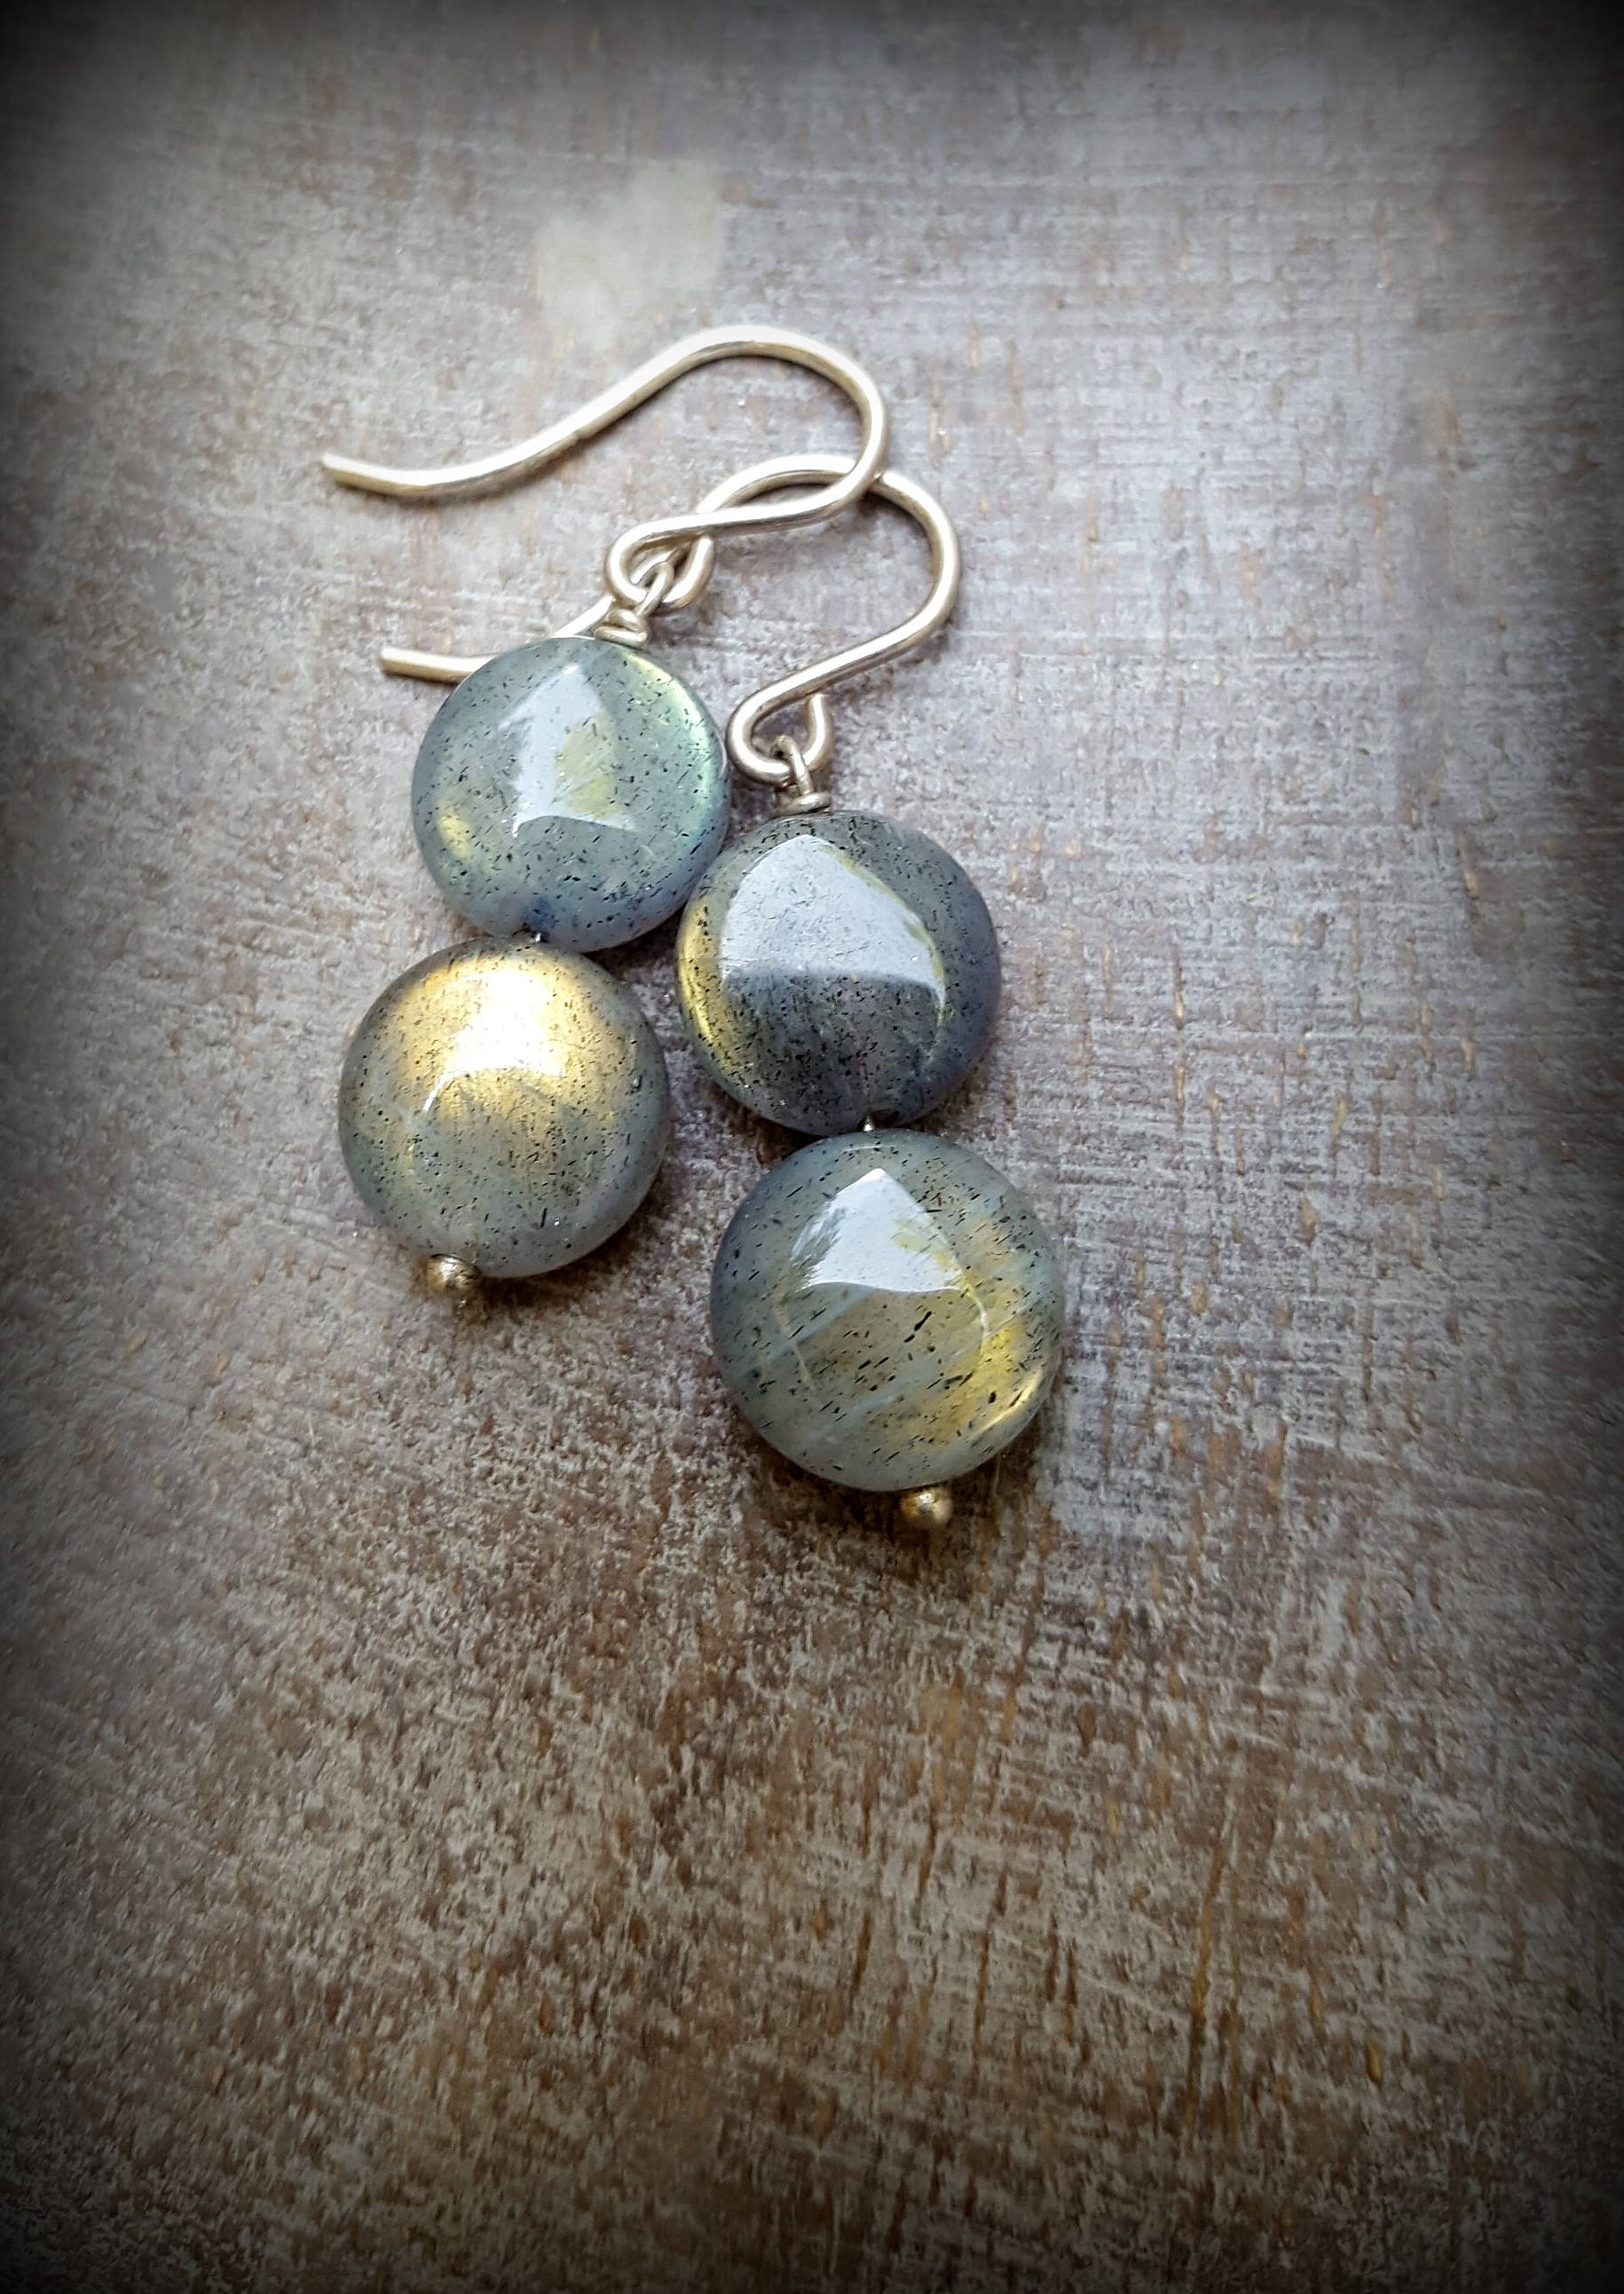 Labradorite Moonbeam Earrings, Smooth Iridescent Labradorite Beads Dangle on Sterling French Wires by Brie, Sleek, Minimalist, Everyday Glow